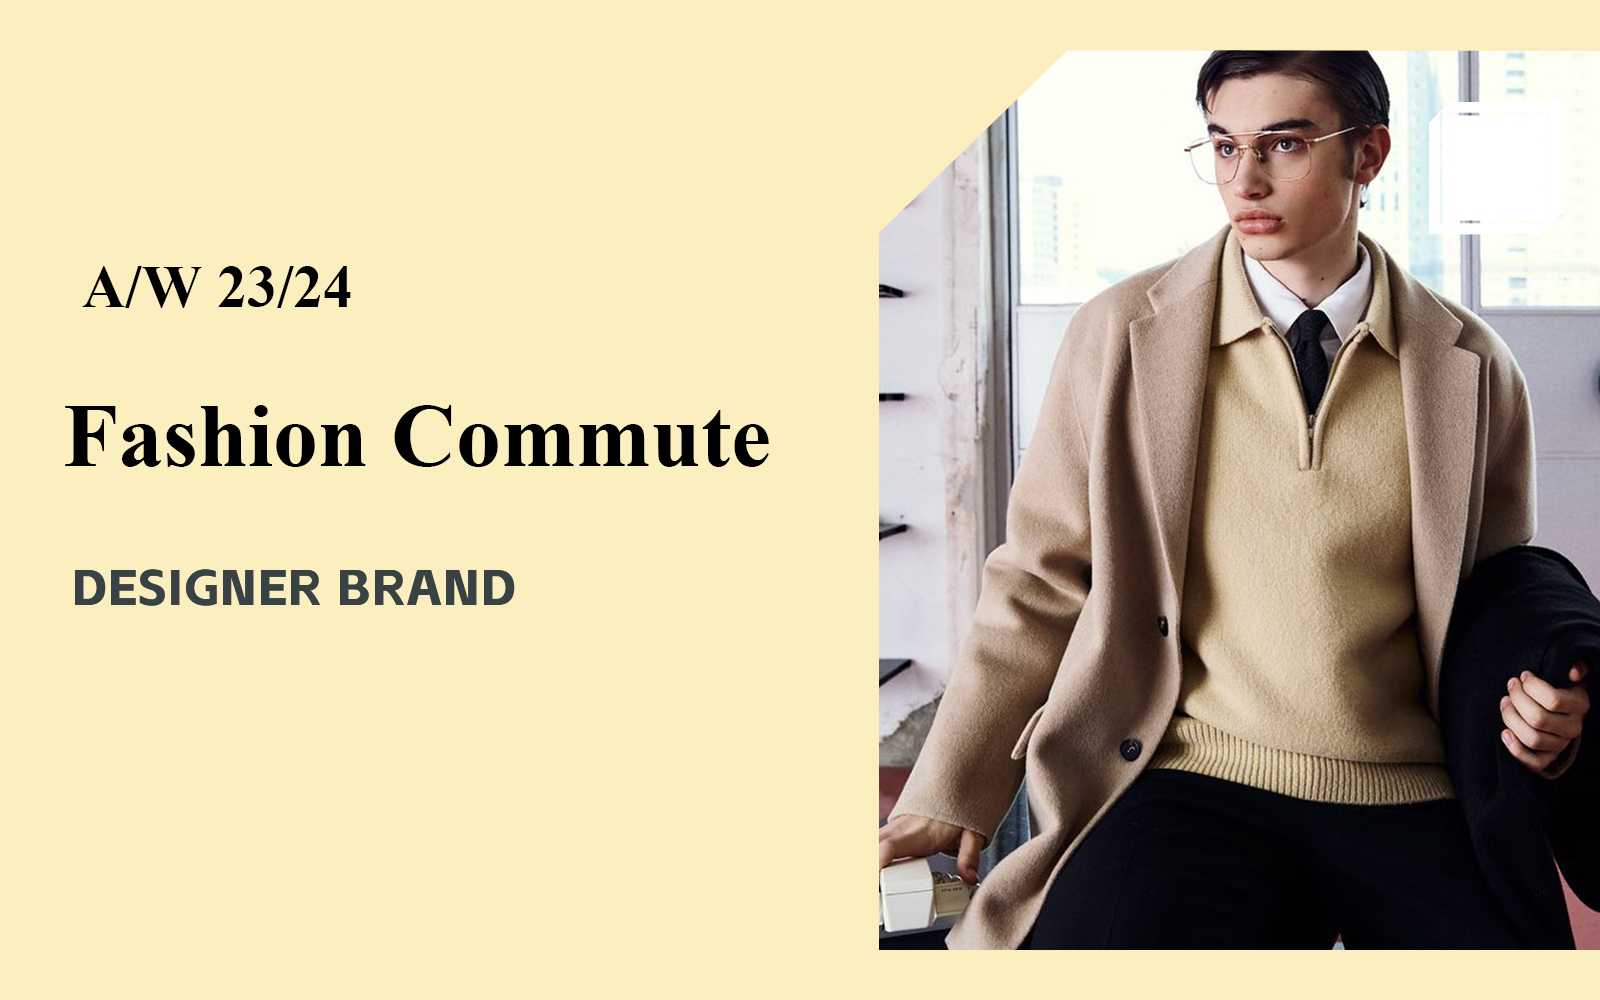 Fashion Commuting -- The Comprehensive Analysis of Knitwear Designer Brand